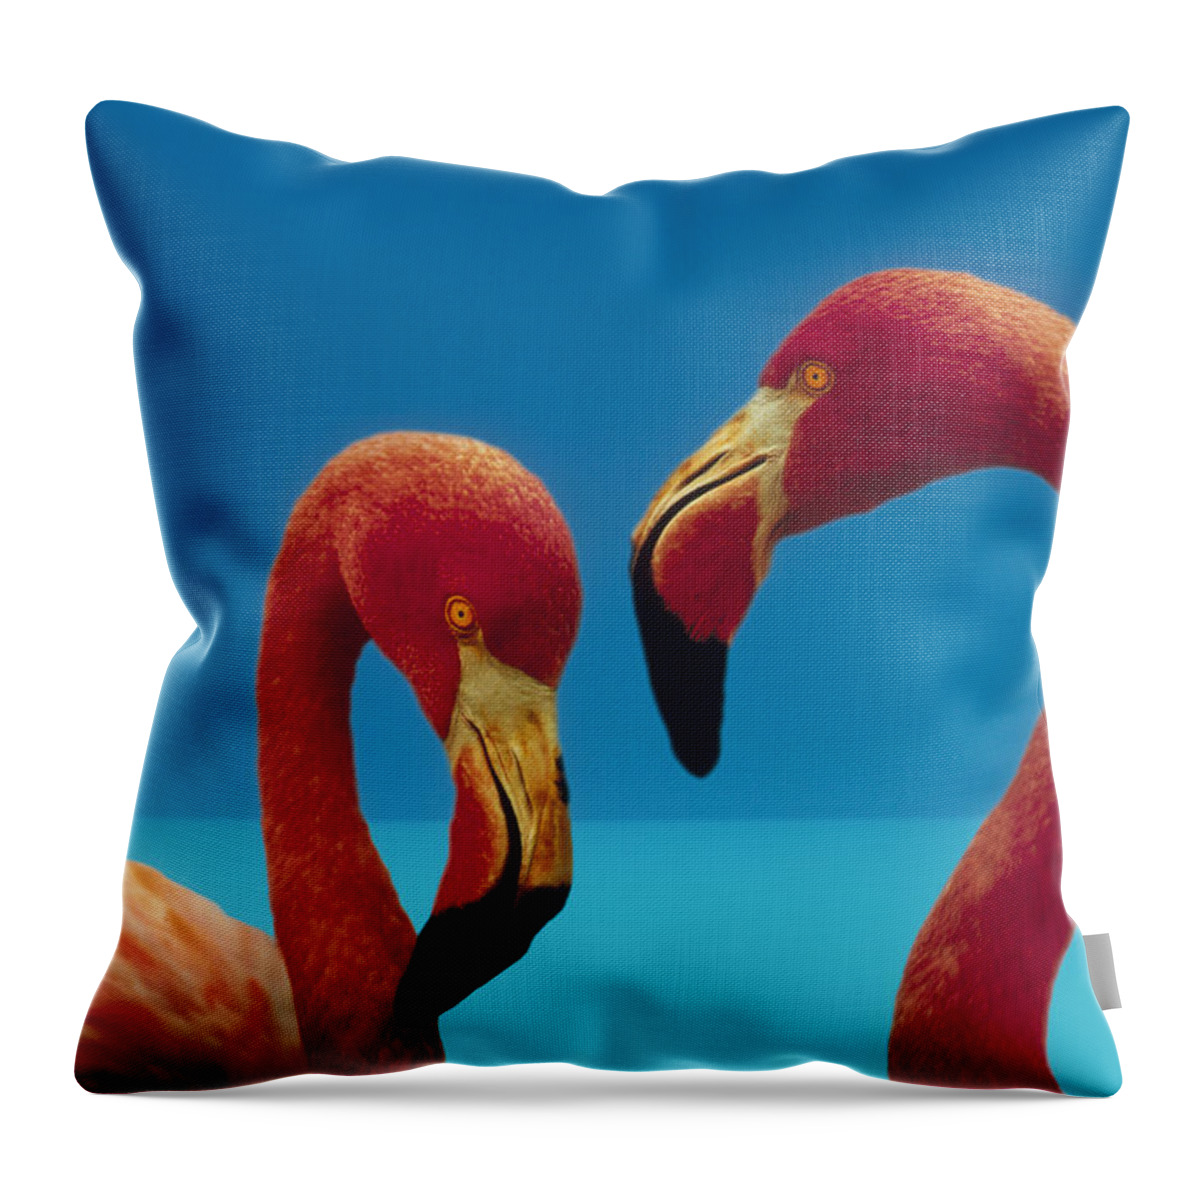 00172310 Throw Pillow featuring the photograph Greater Flamingo Phoenicopterus Ruber #2 by Tim Fitzharris